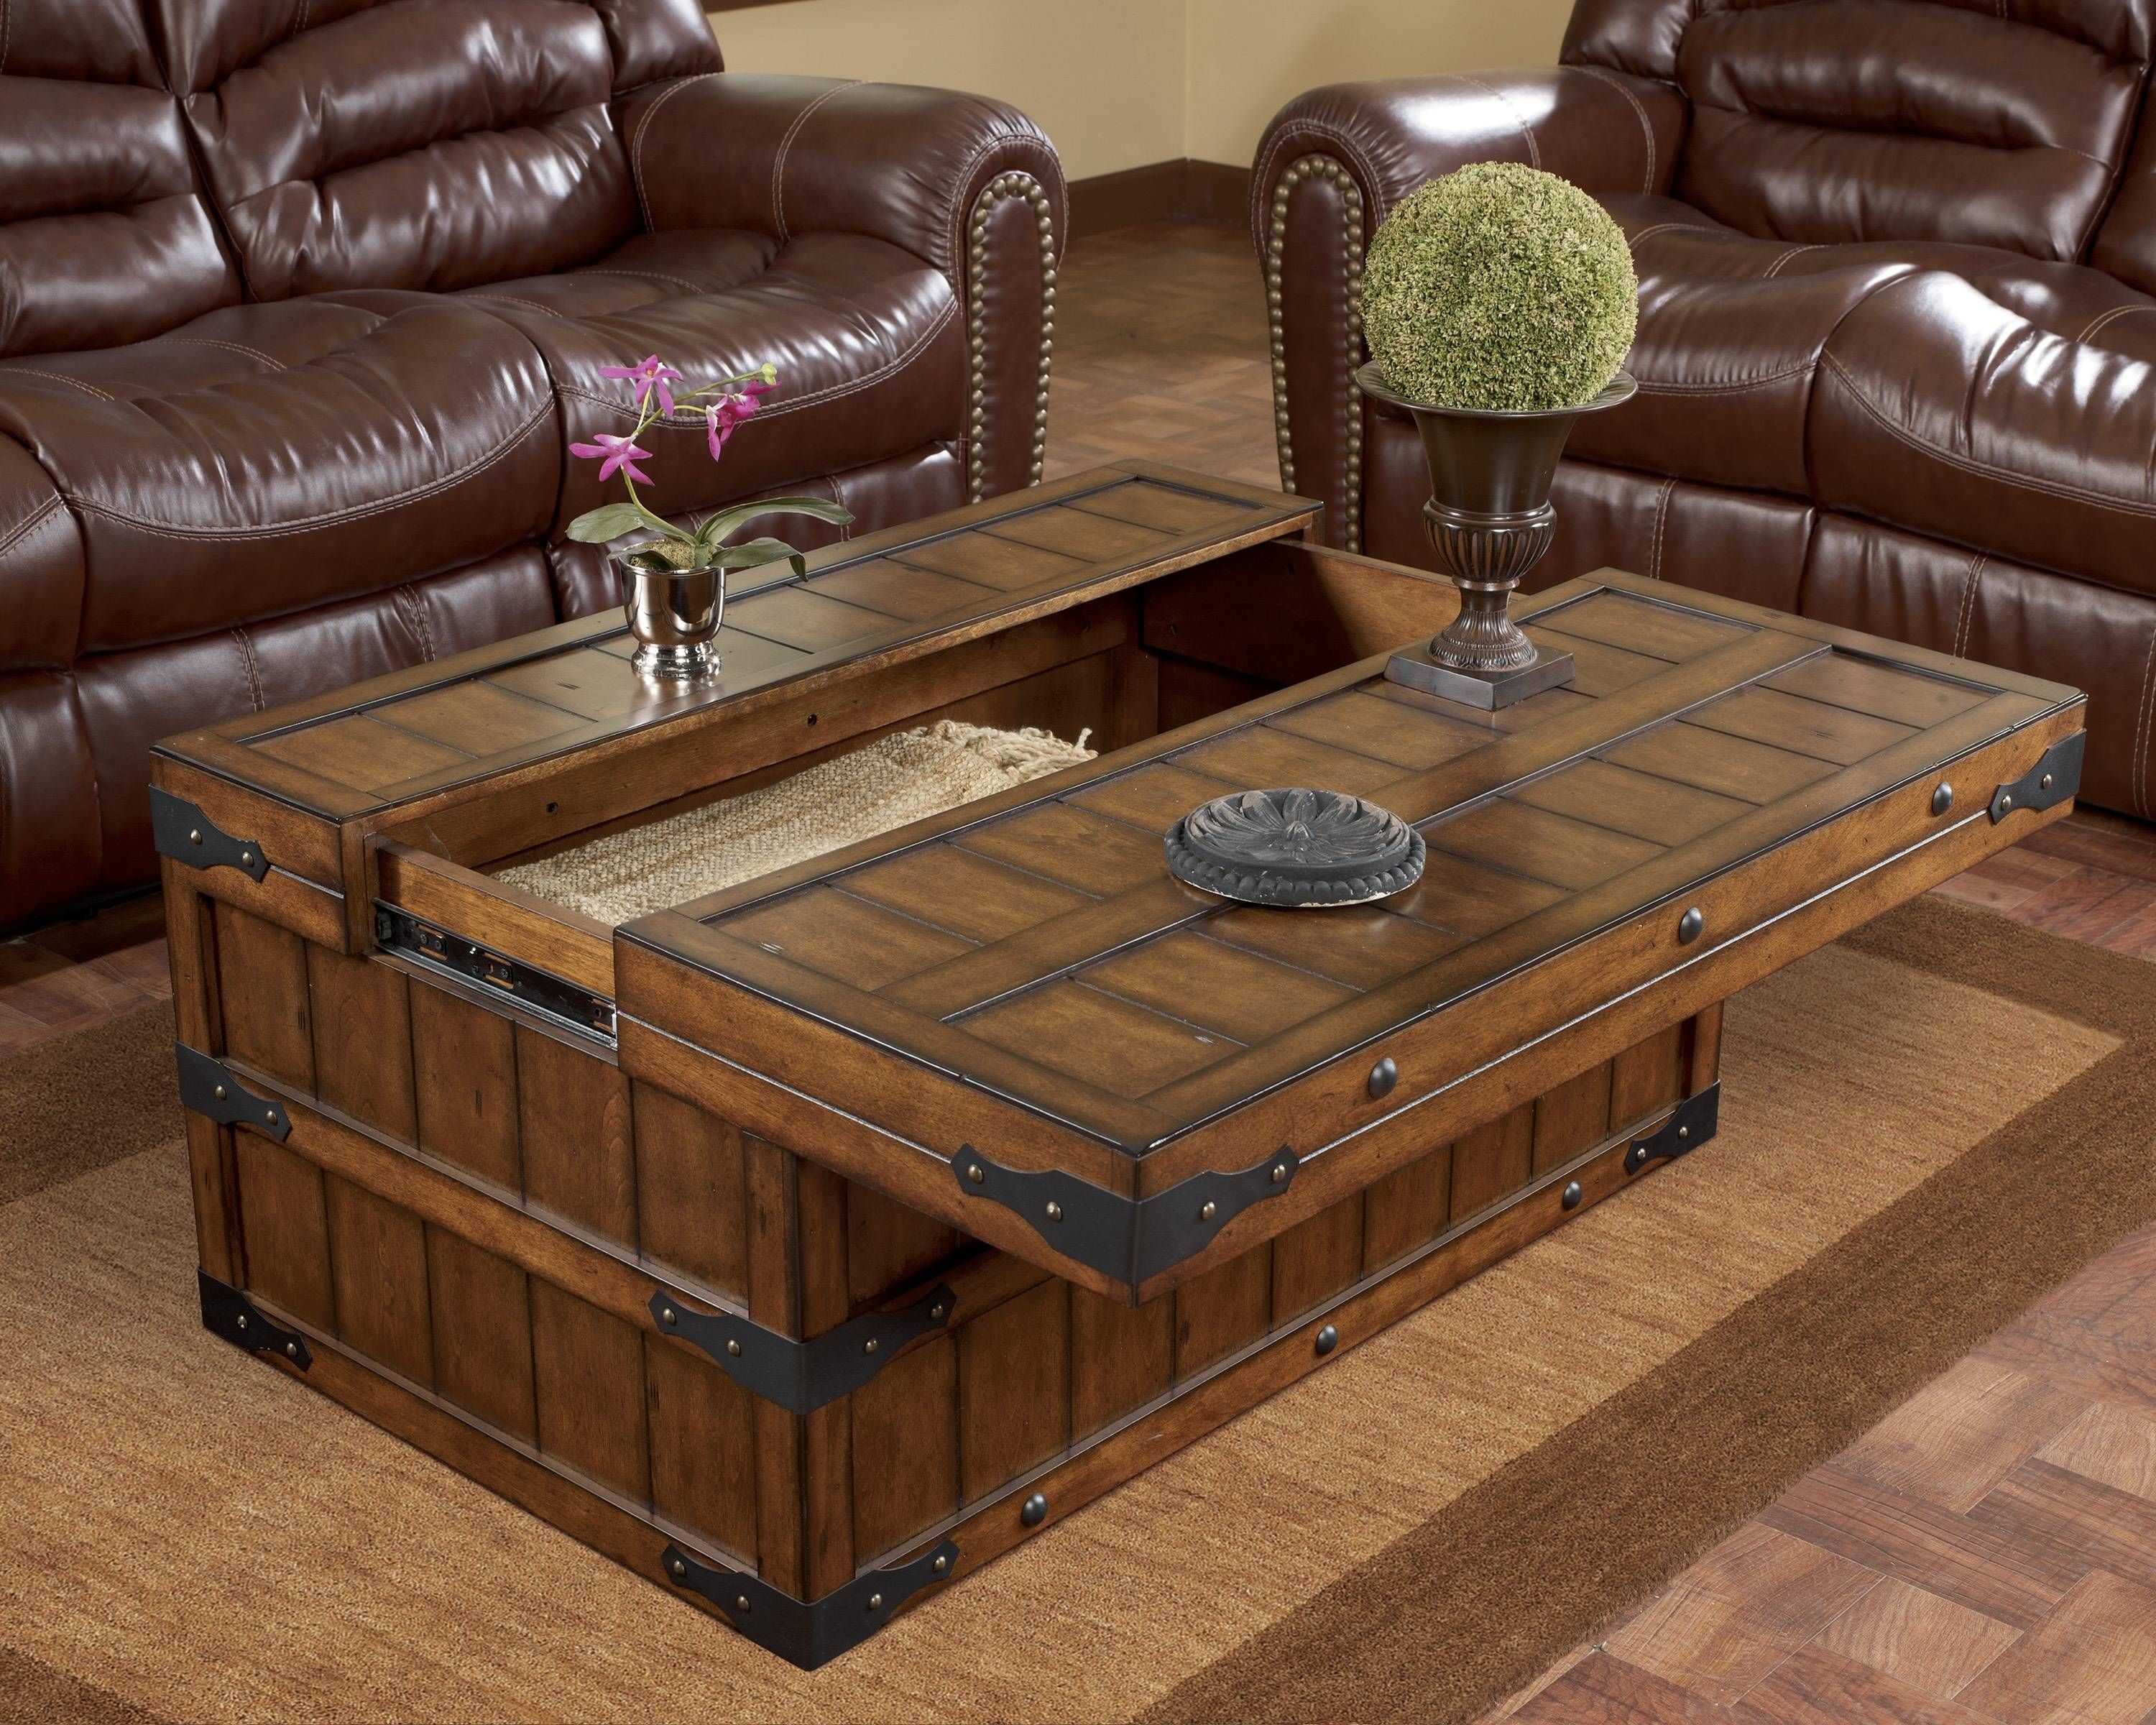 Large Tray For Ottoman Coffee Table Uk – Coffee Addicts Throughout Large Coffee Table With Storage (Photo 4 of 12)